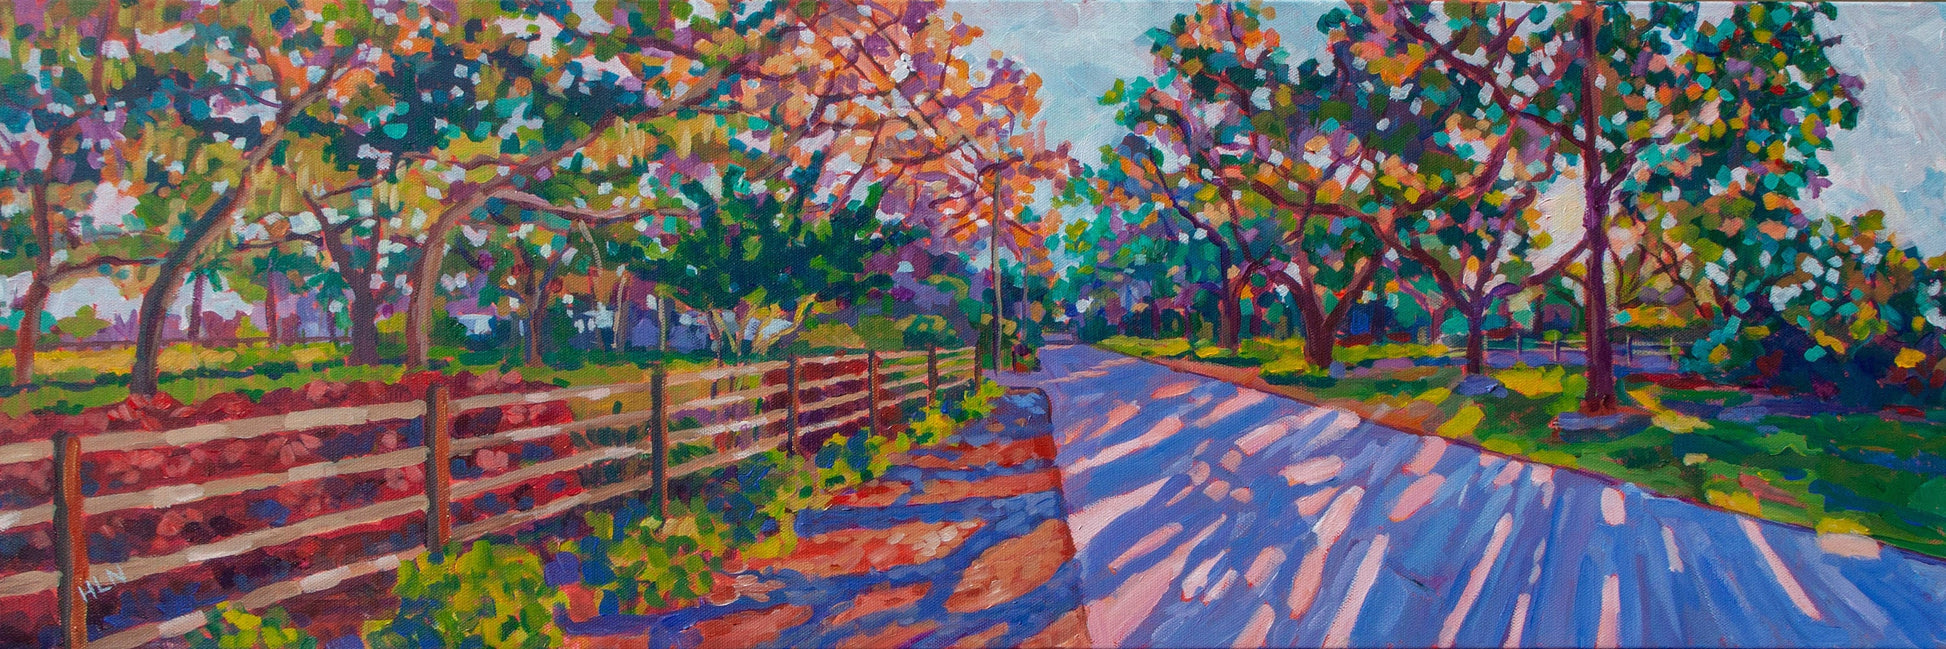 dappled shadows cross the country road at golden hour in this painting of rural Orlando